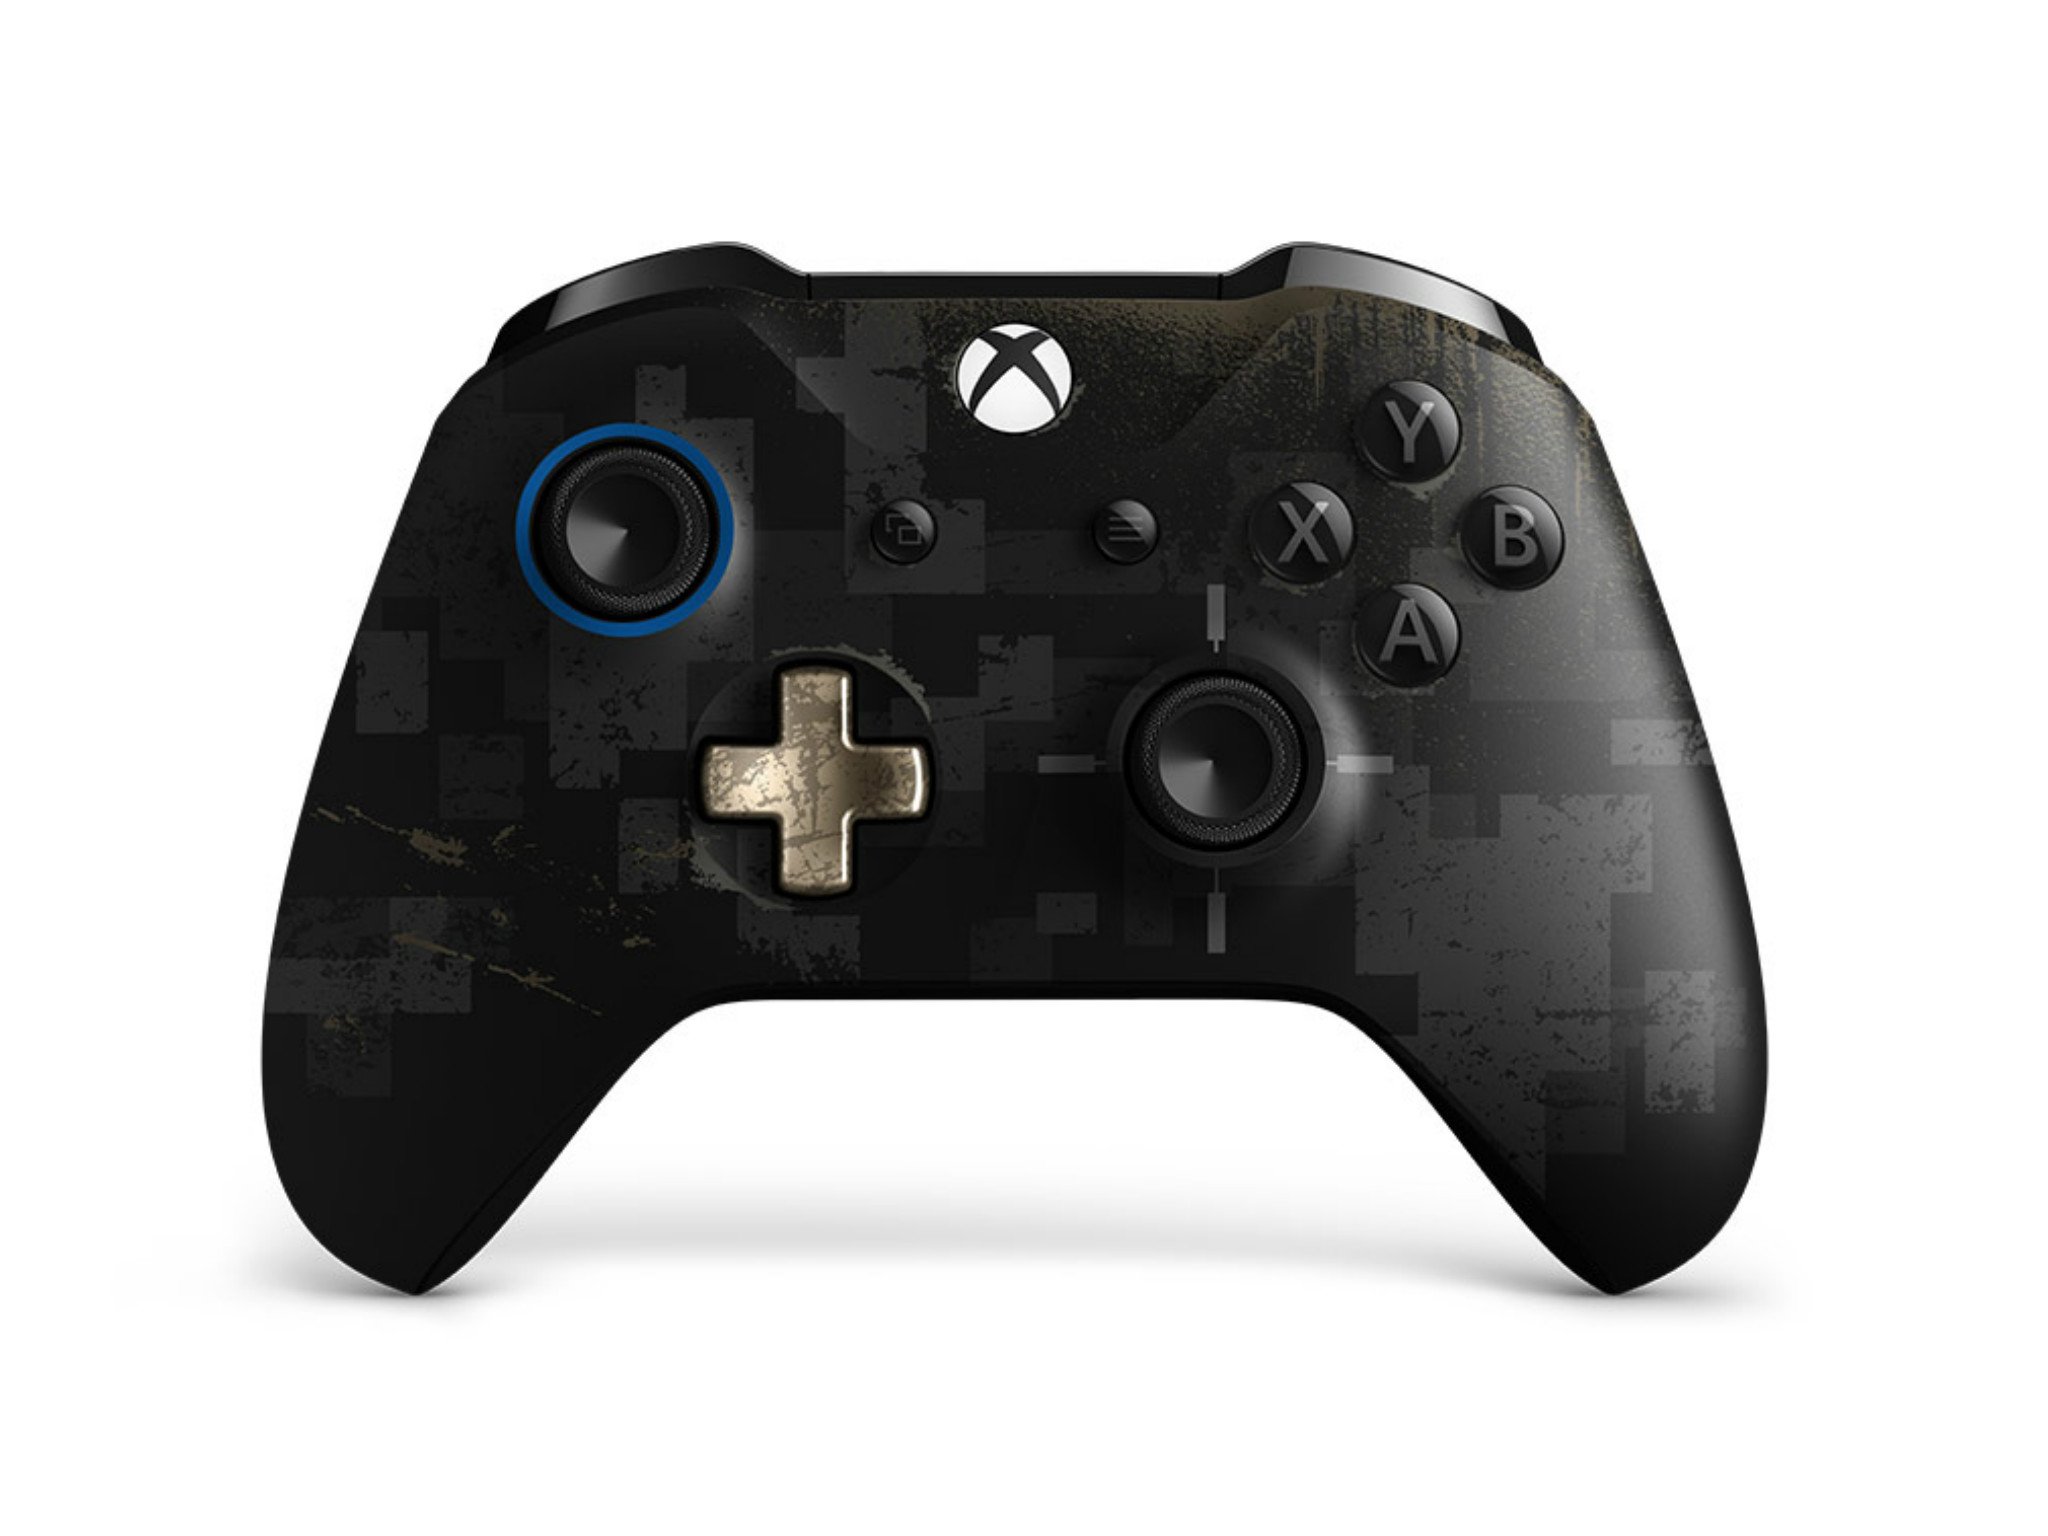 PlayerUnknown's Battlegrounds (PUBG) Xbox controller debuts with textured triggers